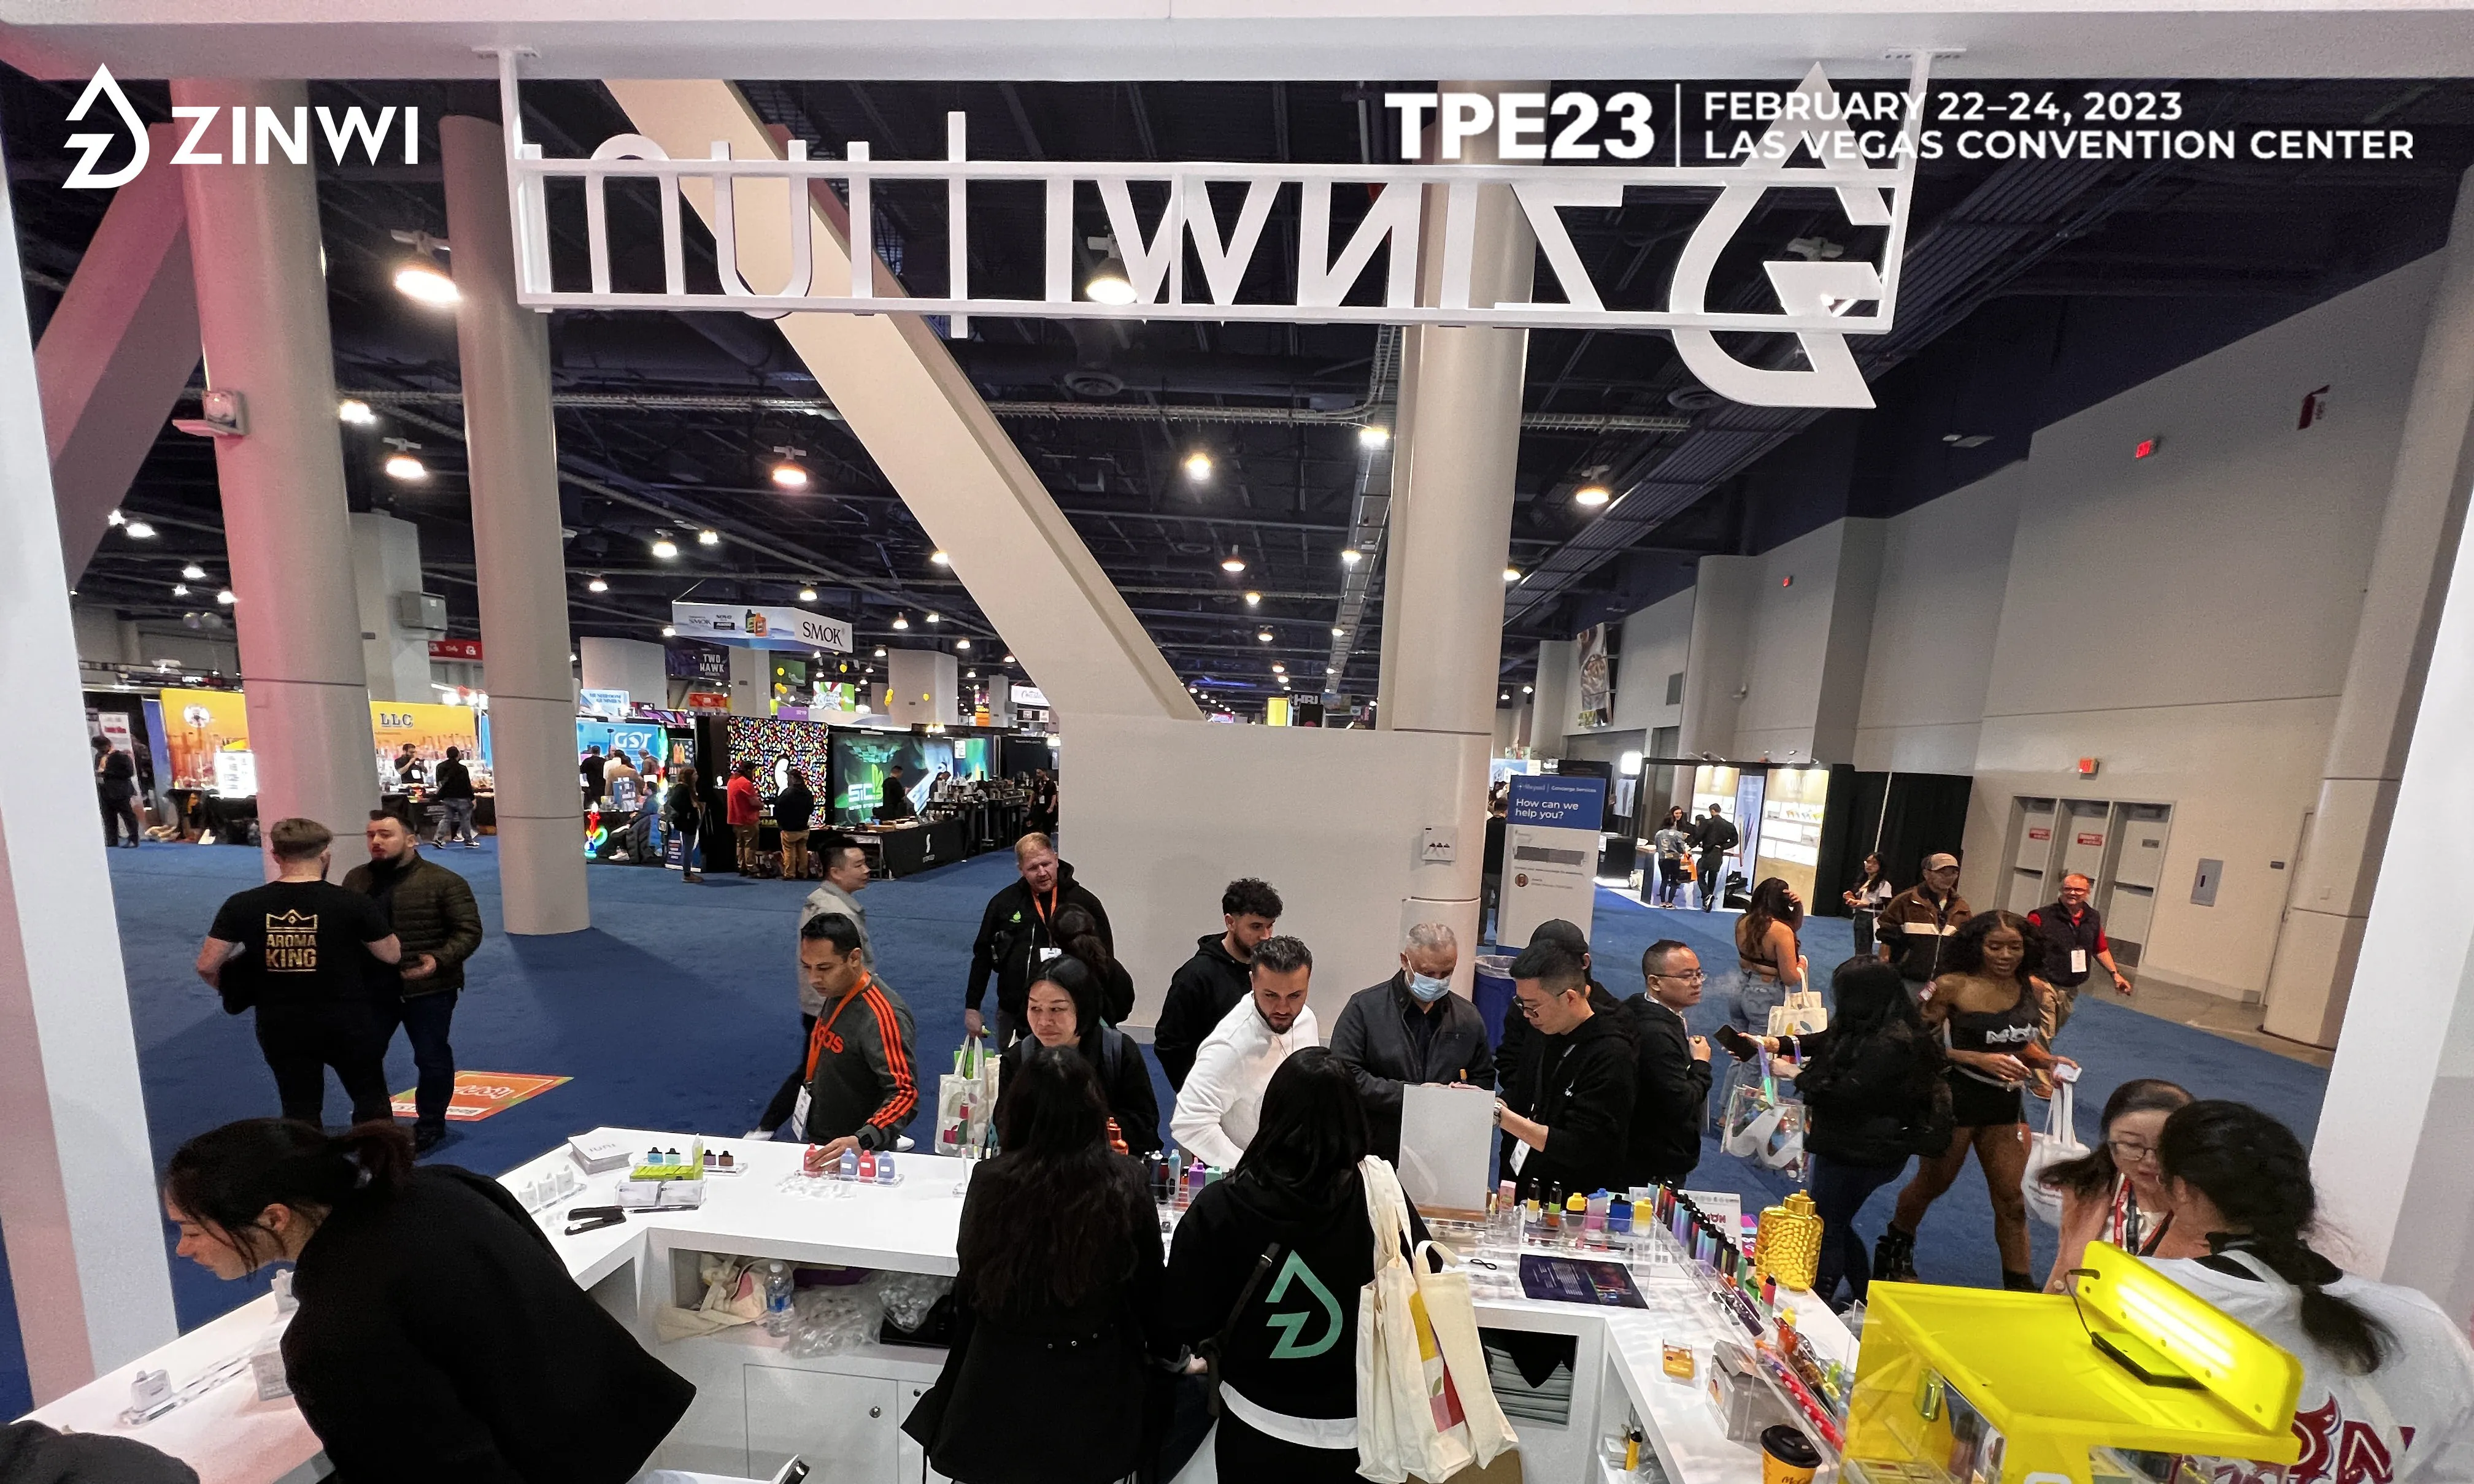 Zinwi Biotech was well received at TPE23 and ended successfully